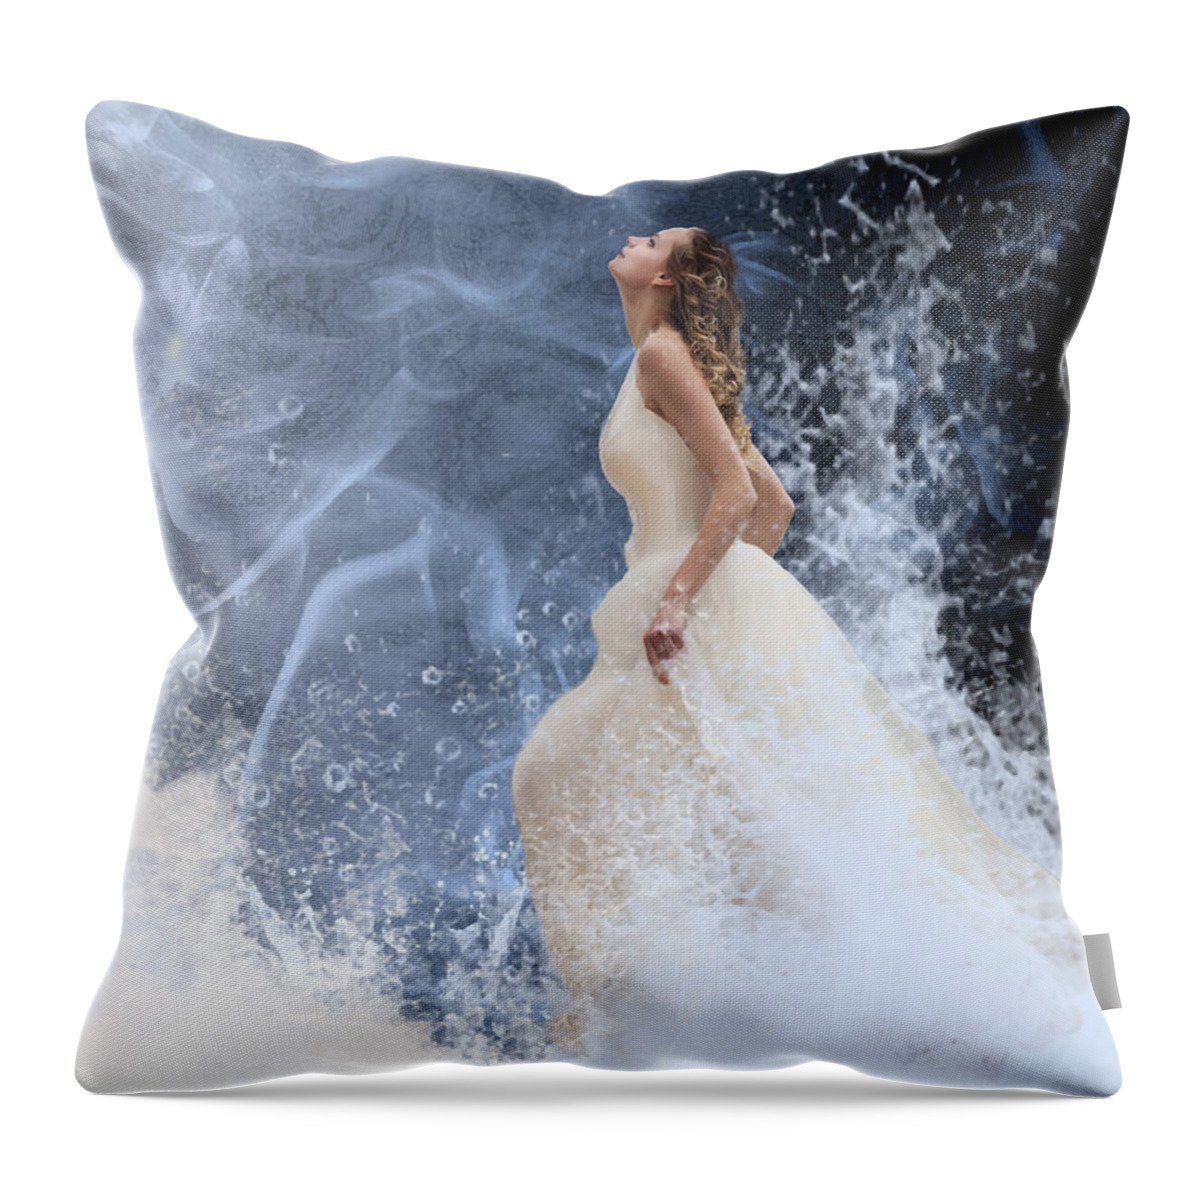 Waves Of His Glory Throw Pillow featuring the digital art Waves of His Glory by Jennifer Page